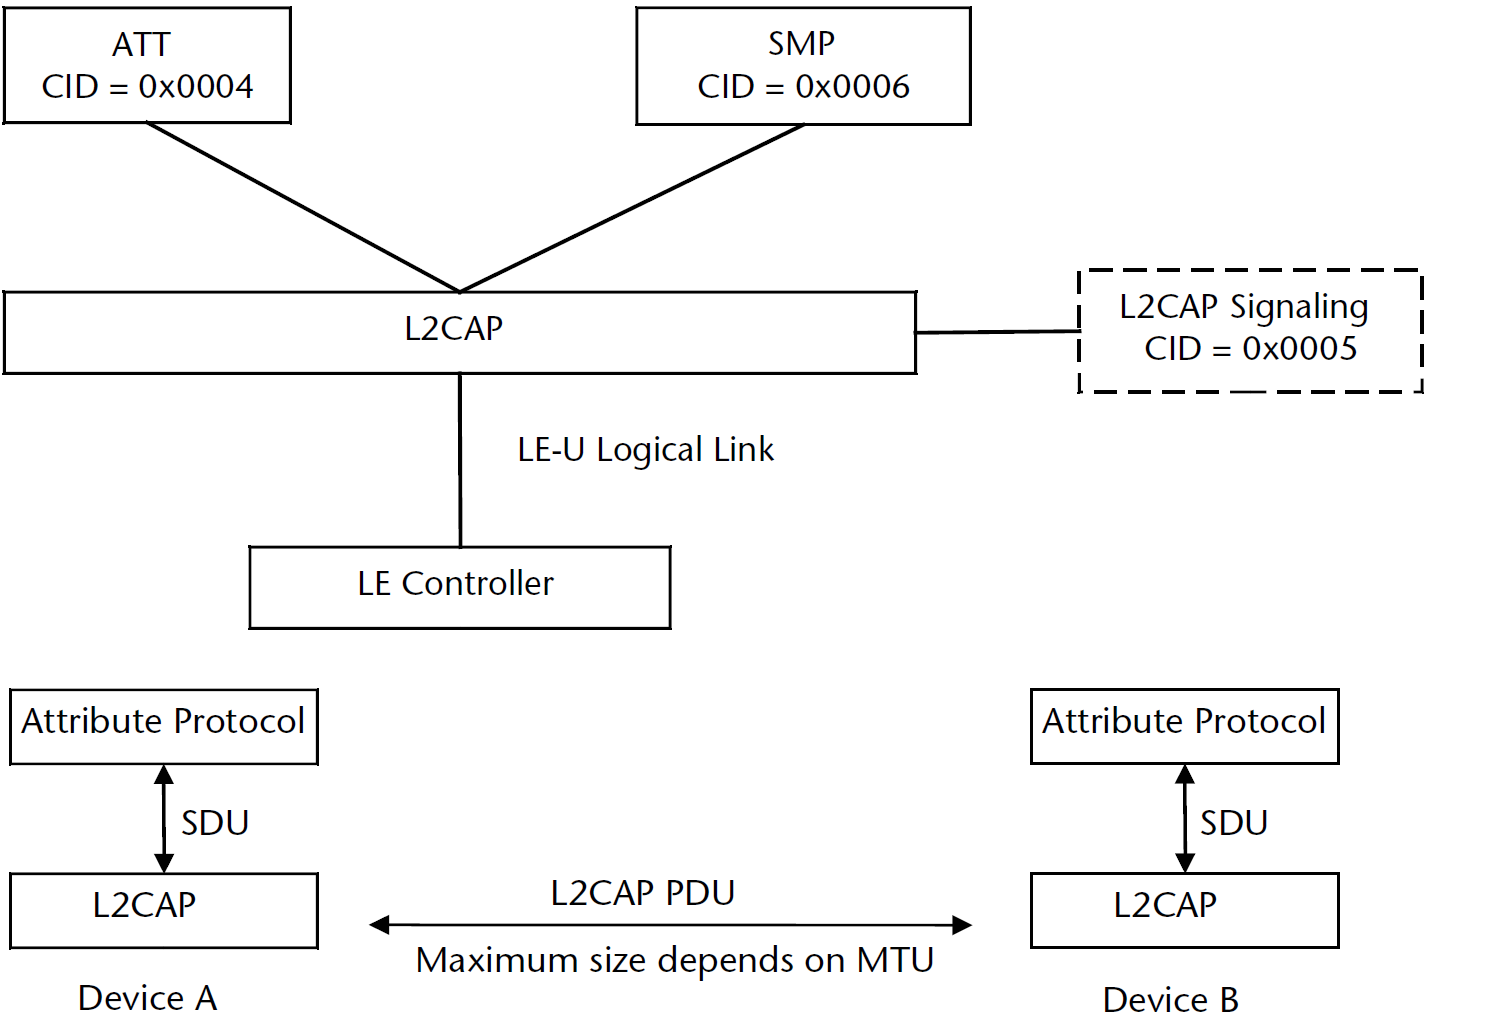 BLE L2CAP structure and ATT packet assembly model